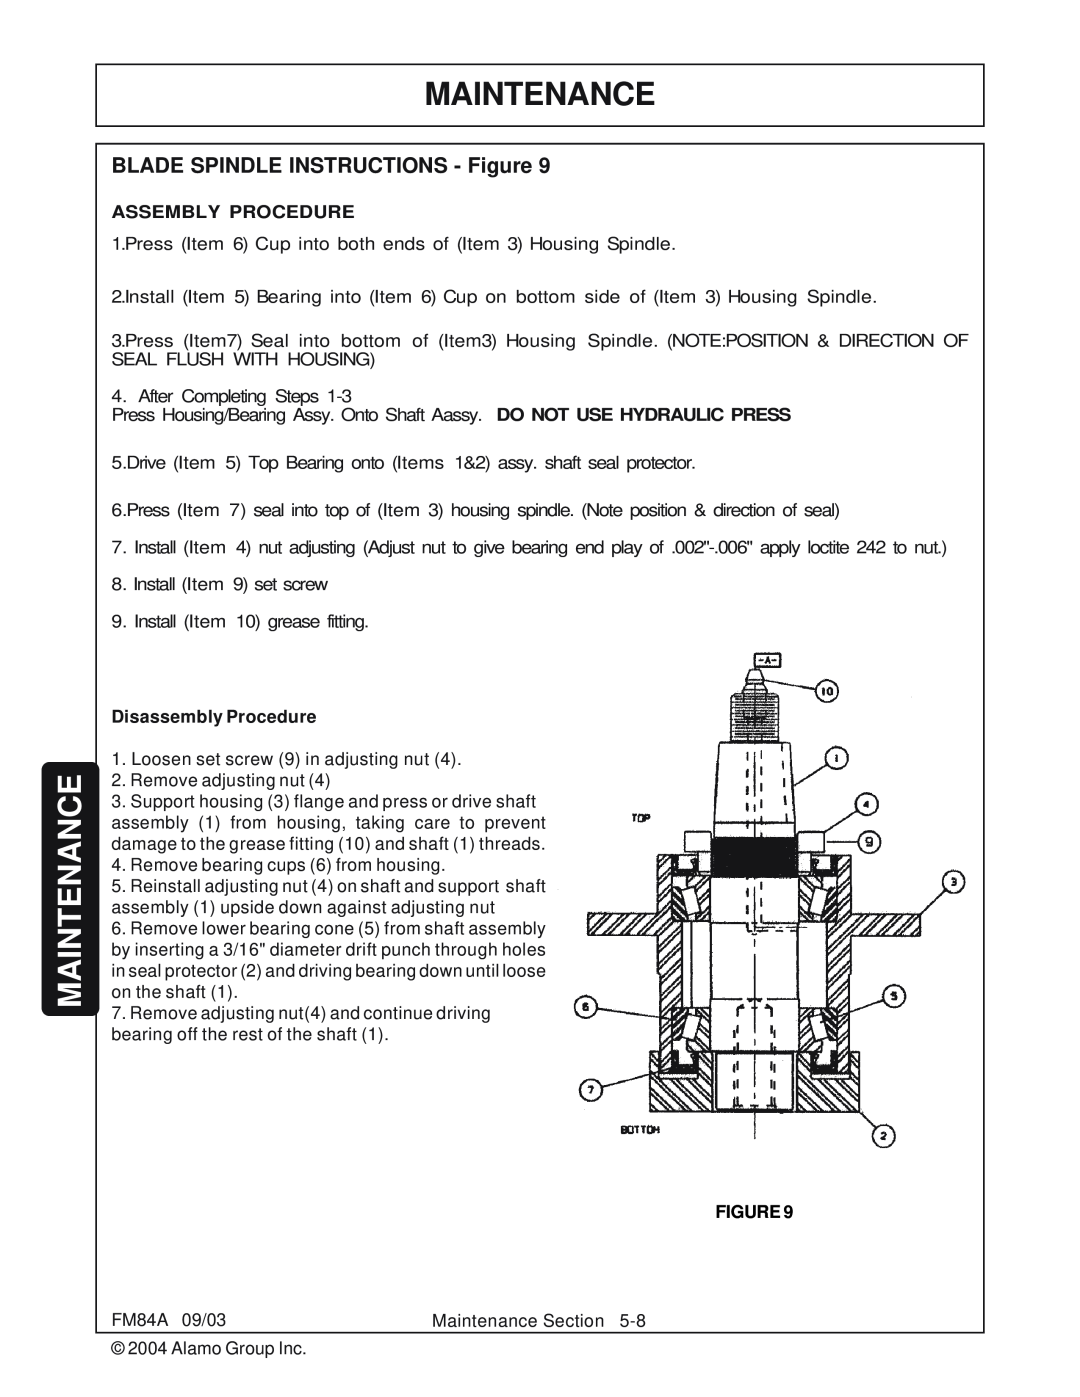 Servis-Rhino FM84A manual Maintenance, BLADE SPINDLE INSTRUCTIONS - Figure, Assembly Procedure, Disassembly Procedure 